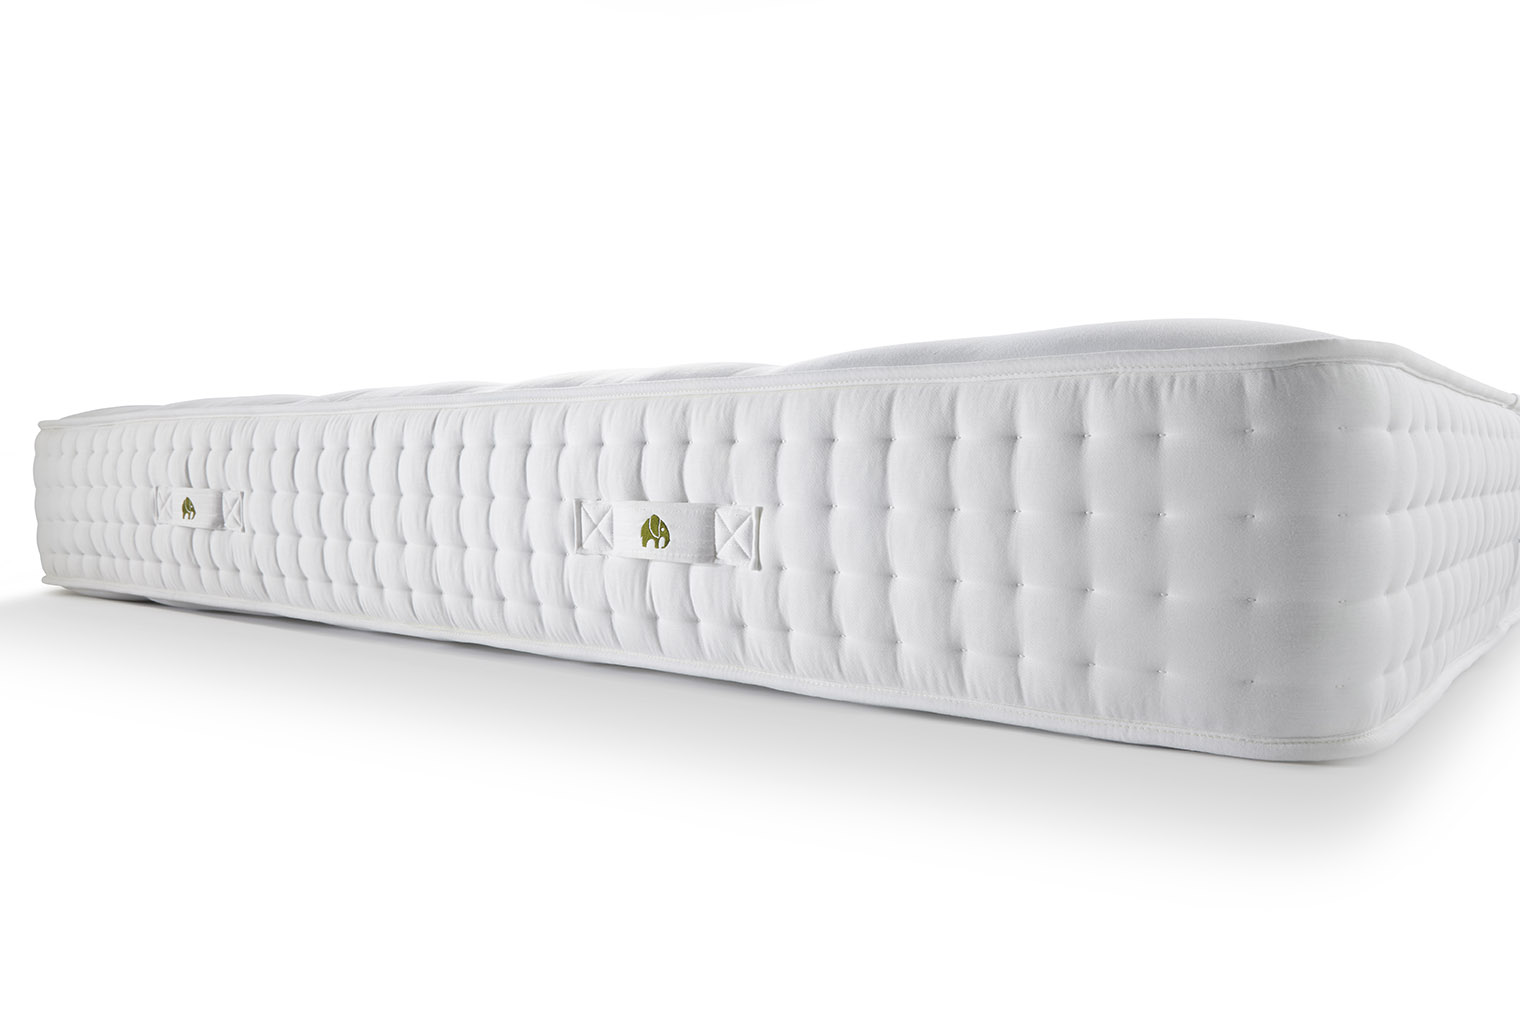 mattress that can be cut to fit